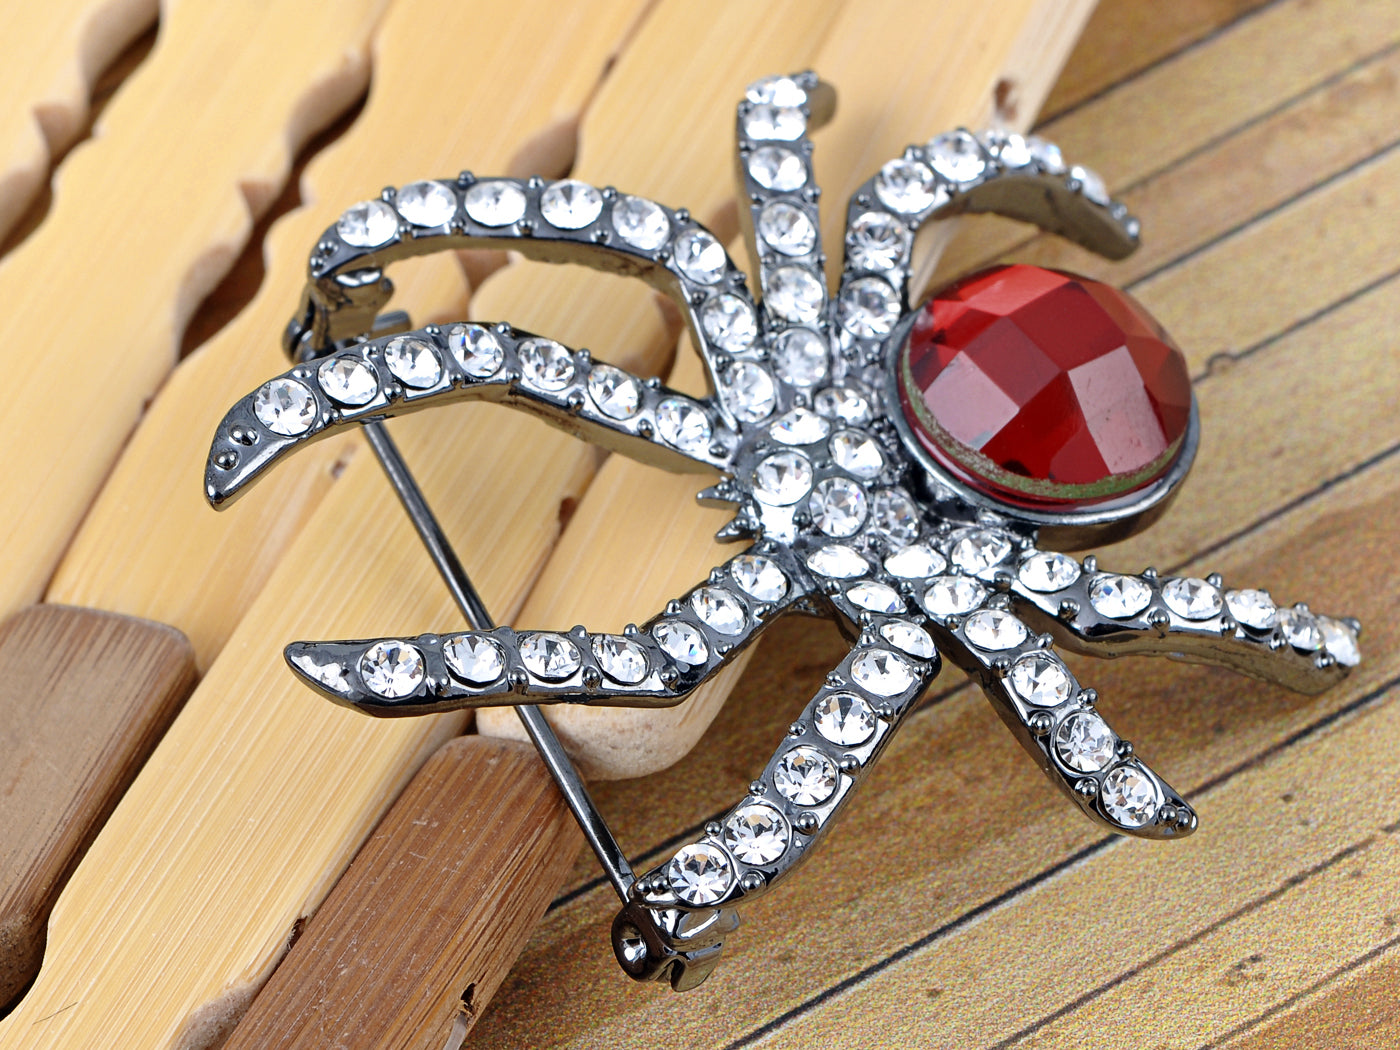 Elements Ruby Red Gem Body Petite Spider Pin Brooch